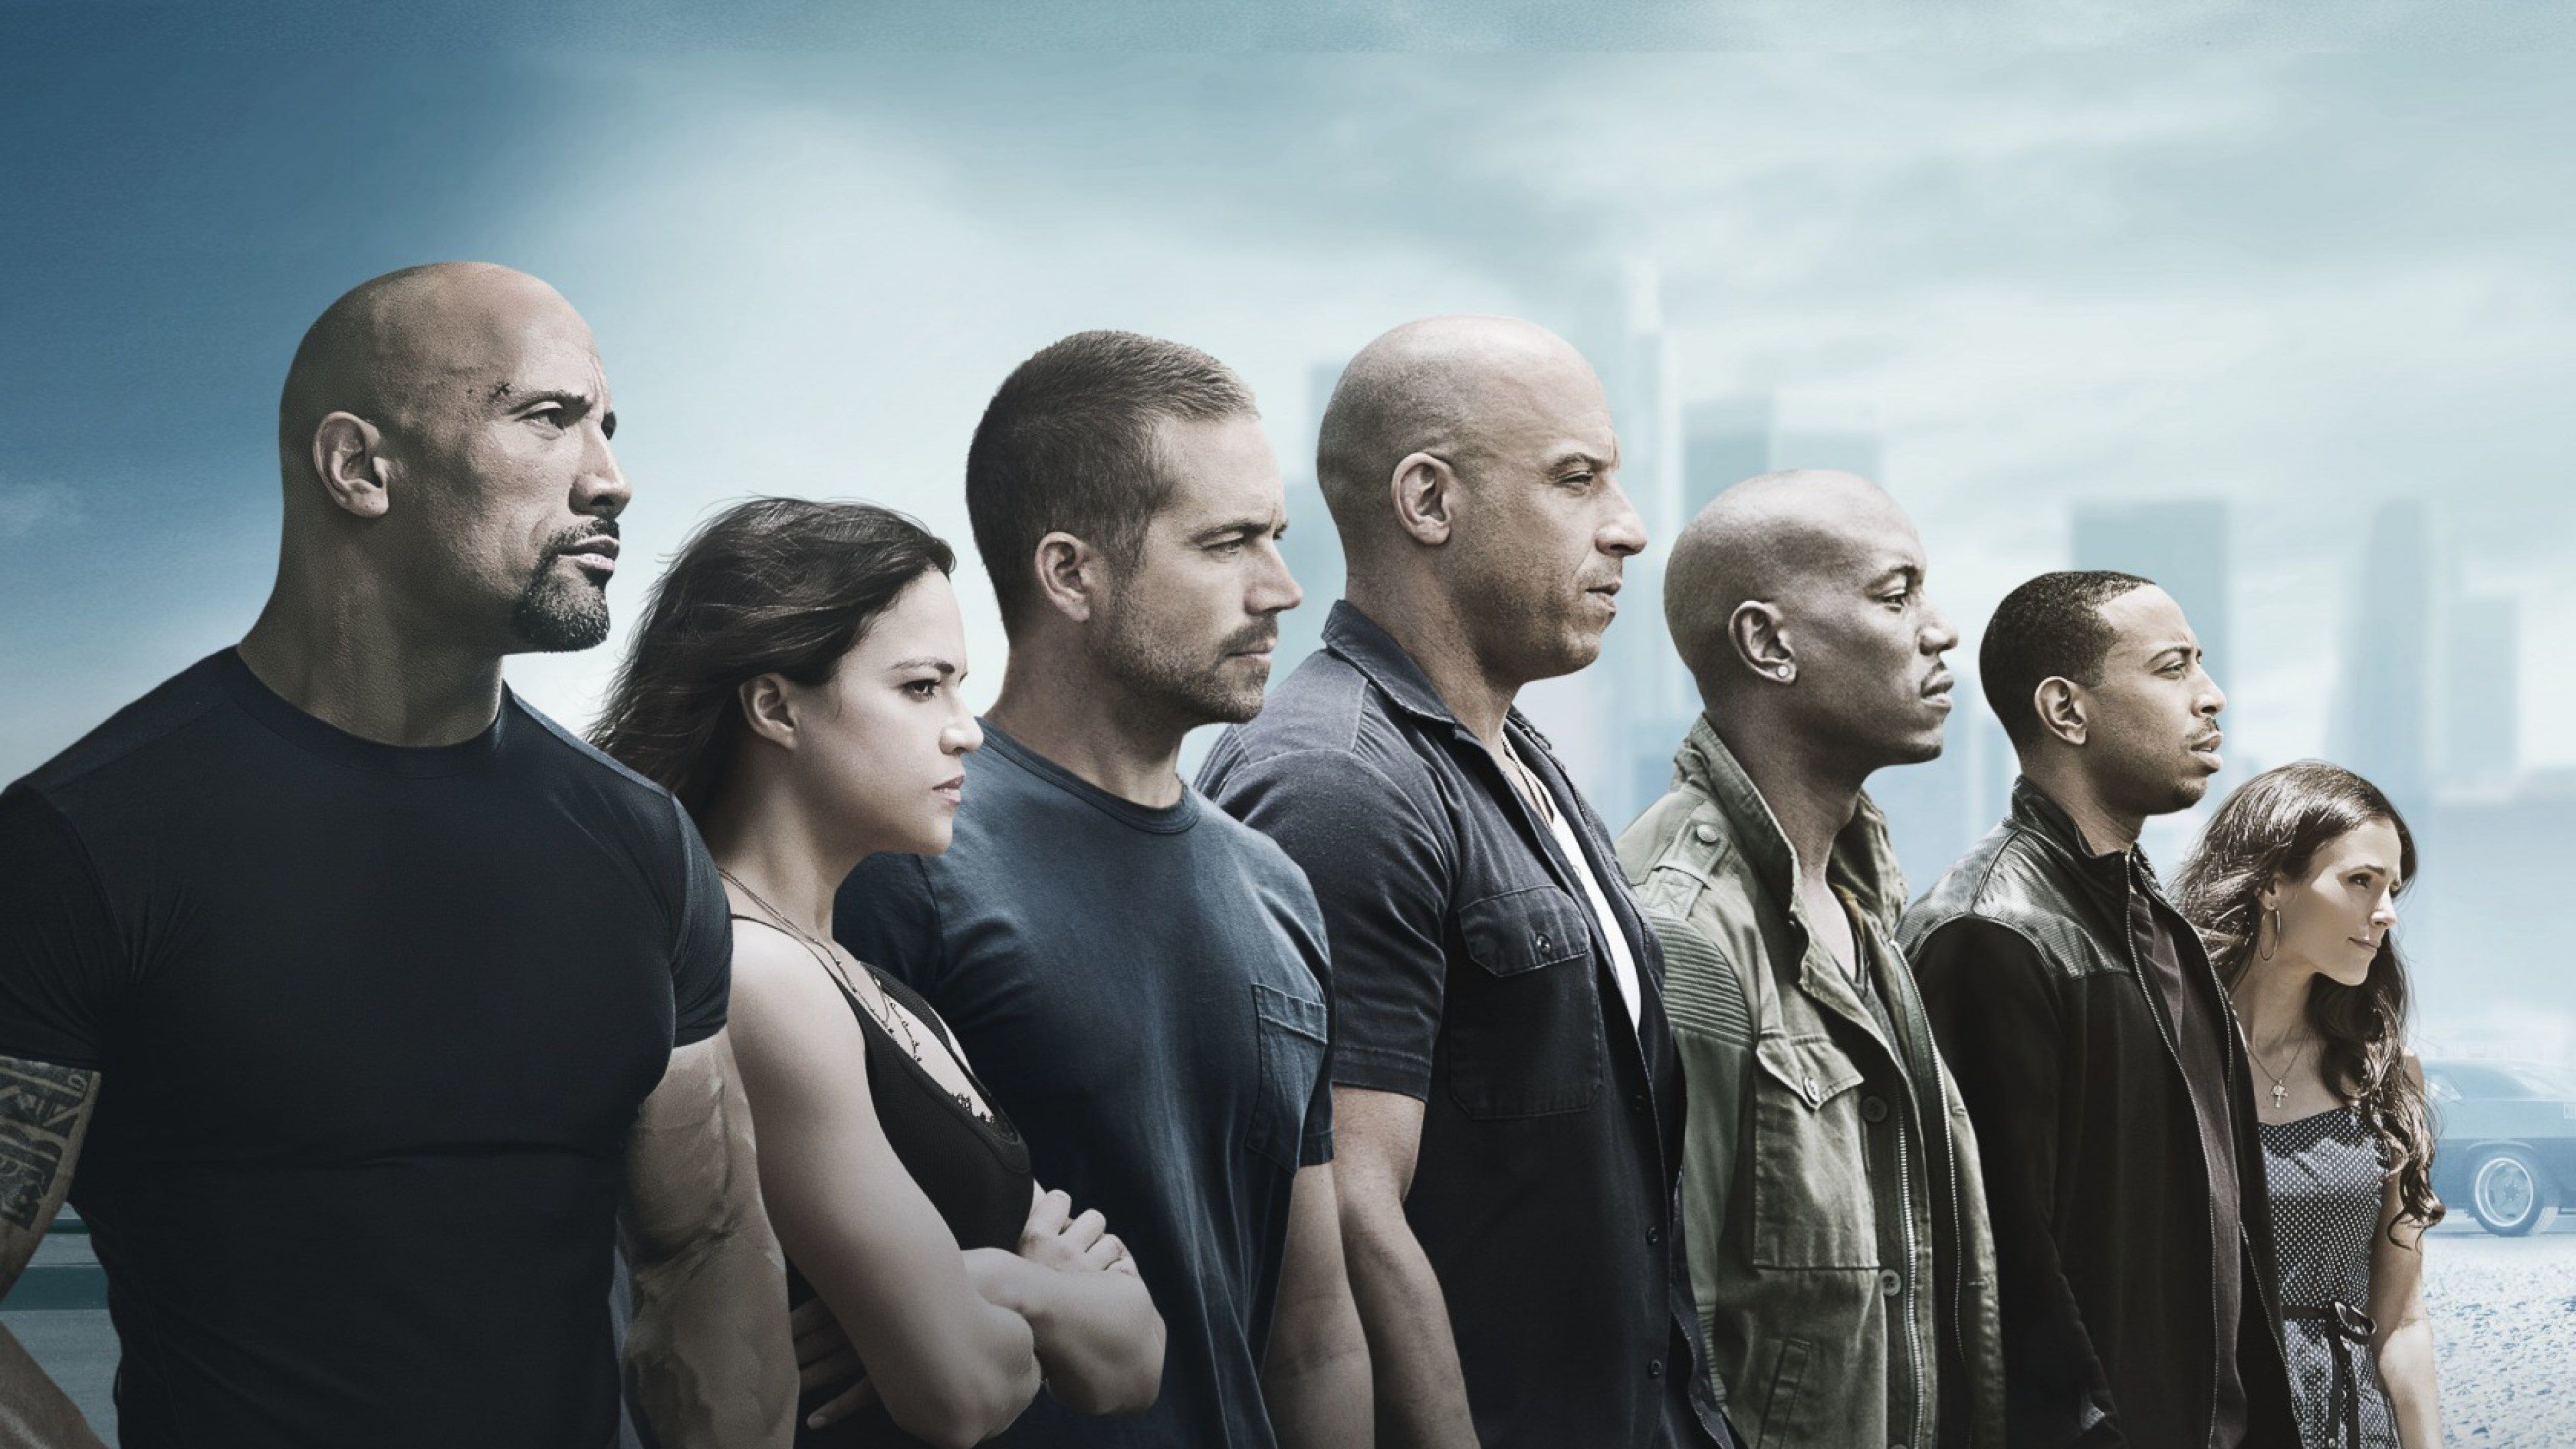 Fast and Furious, Movie wallpaper, 4K resolution, Action-packed film, 3840x2160 4K Desktop